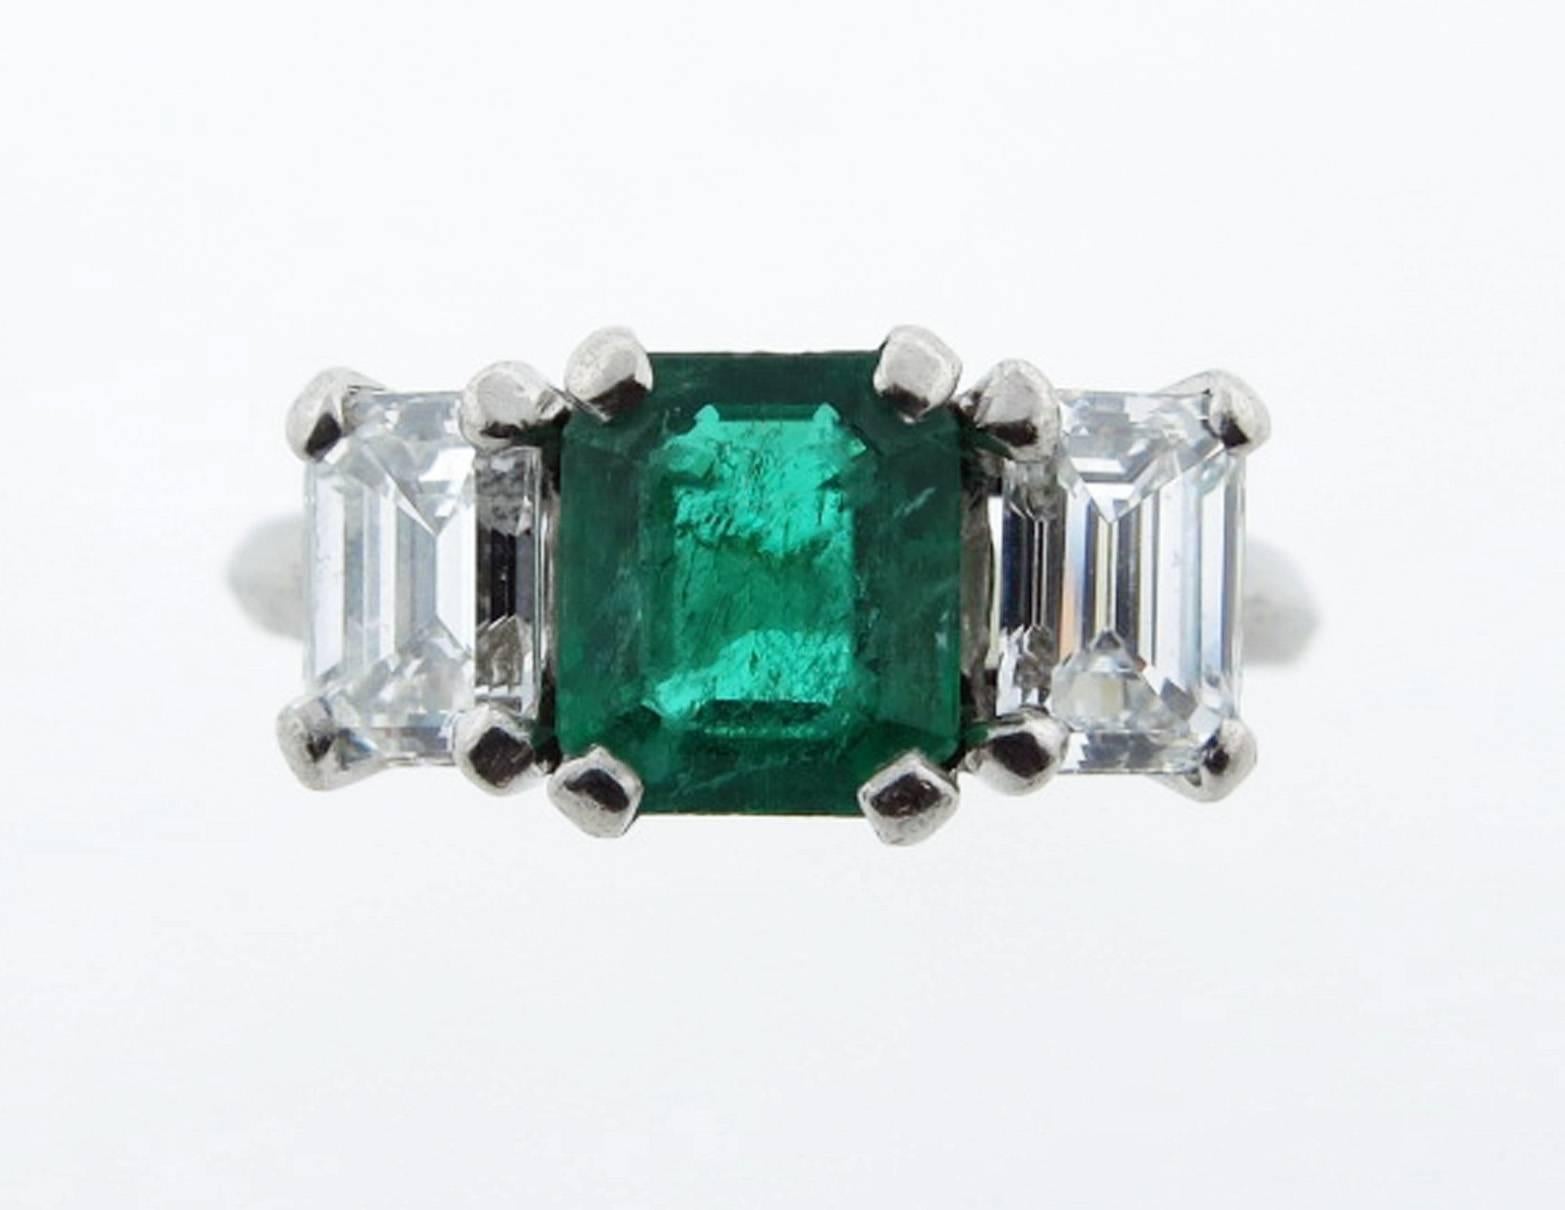 Handmade platinum mount three stone ring. The center is prong set with a natural fine emerald cut emerald measuring 6.7mm. x 6.2mm. weighing approx 1.25cts. Each side is prong set with an emerald cut diamond measuring 5.7mm. x 4.1 mm. weighing